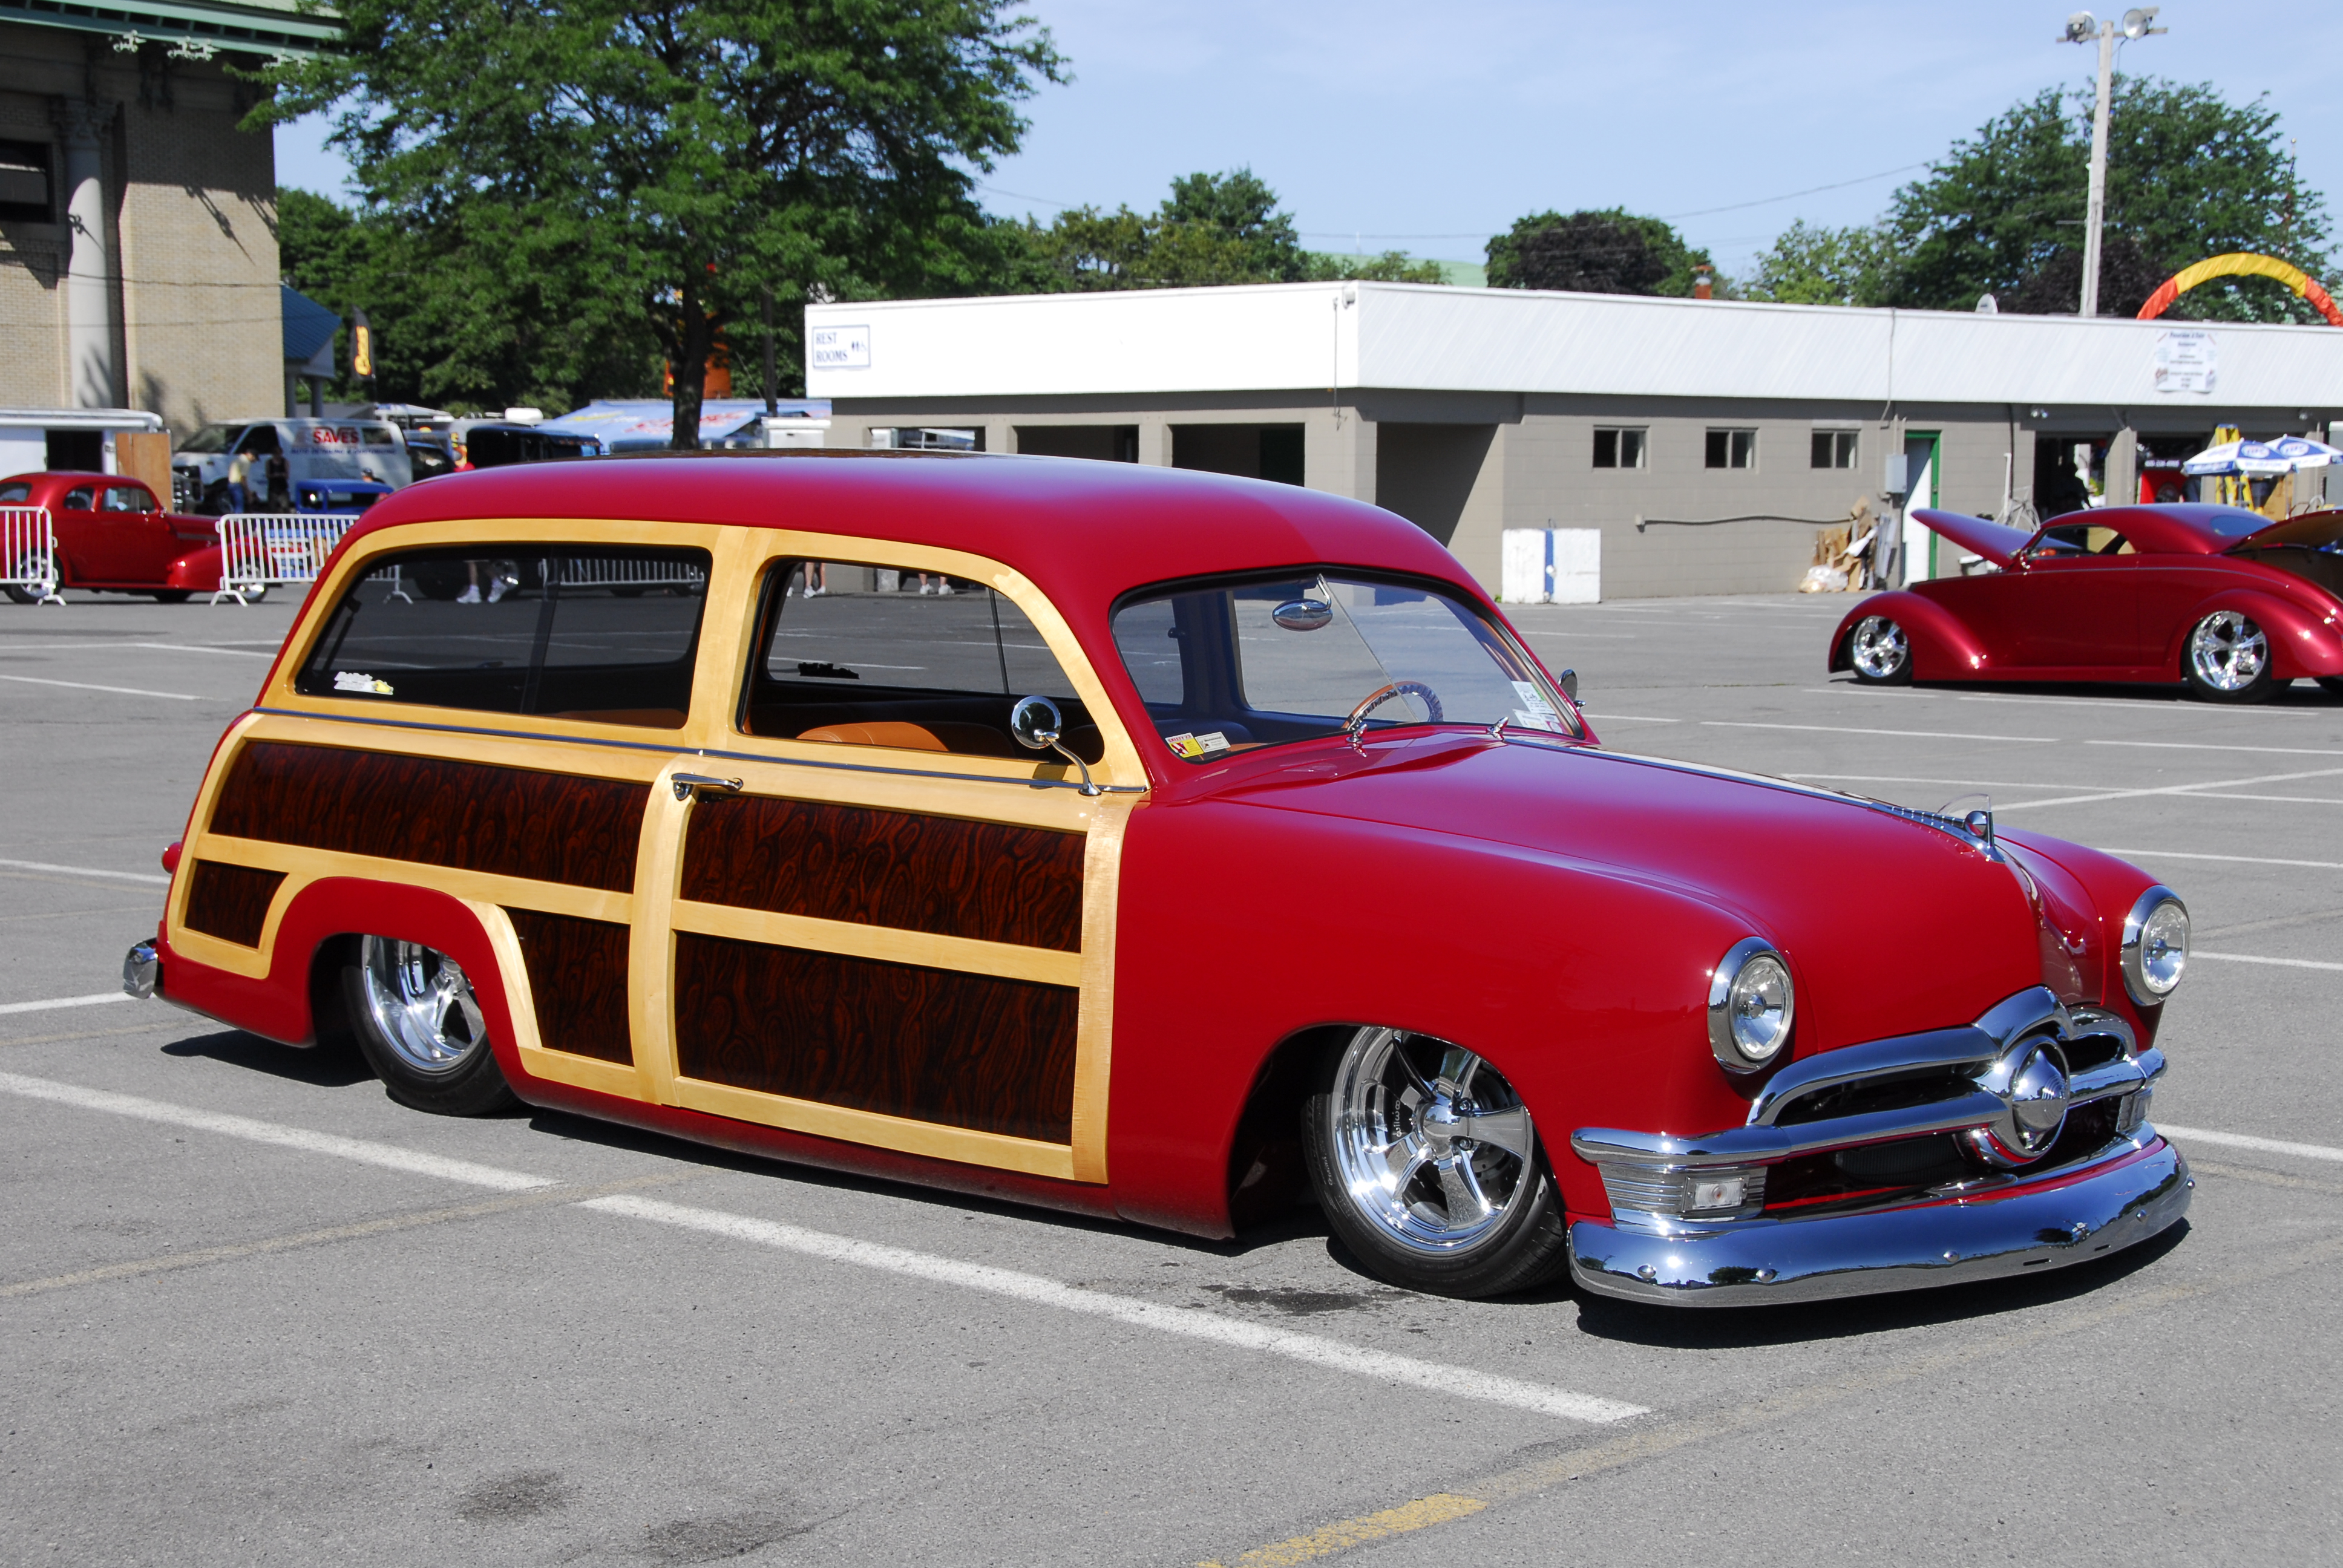 Vintage 1950 Ford Woody Wagon parked under the sun, perfect for desktop wallpaper.